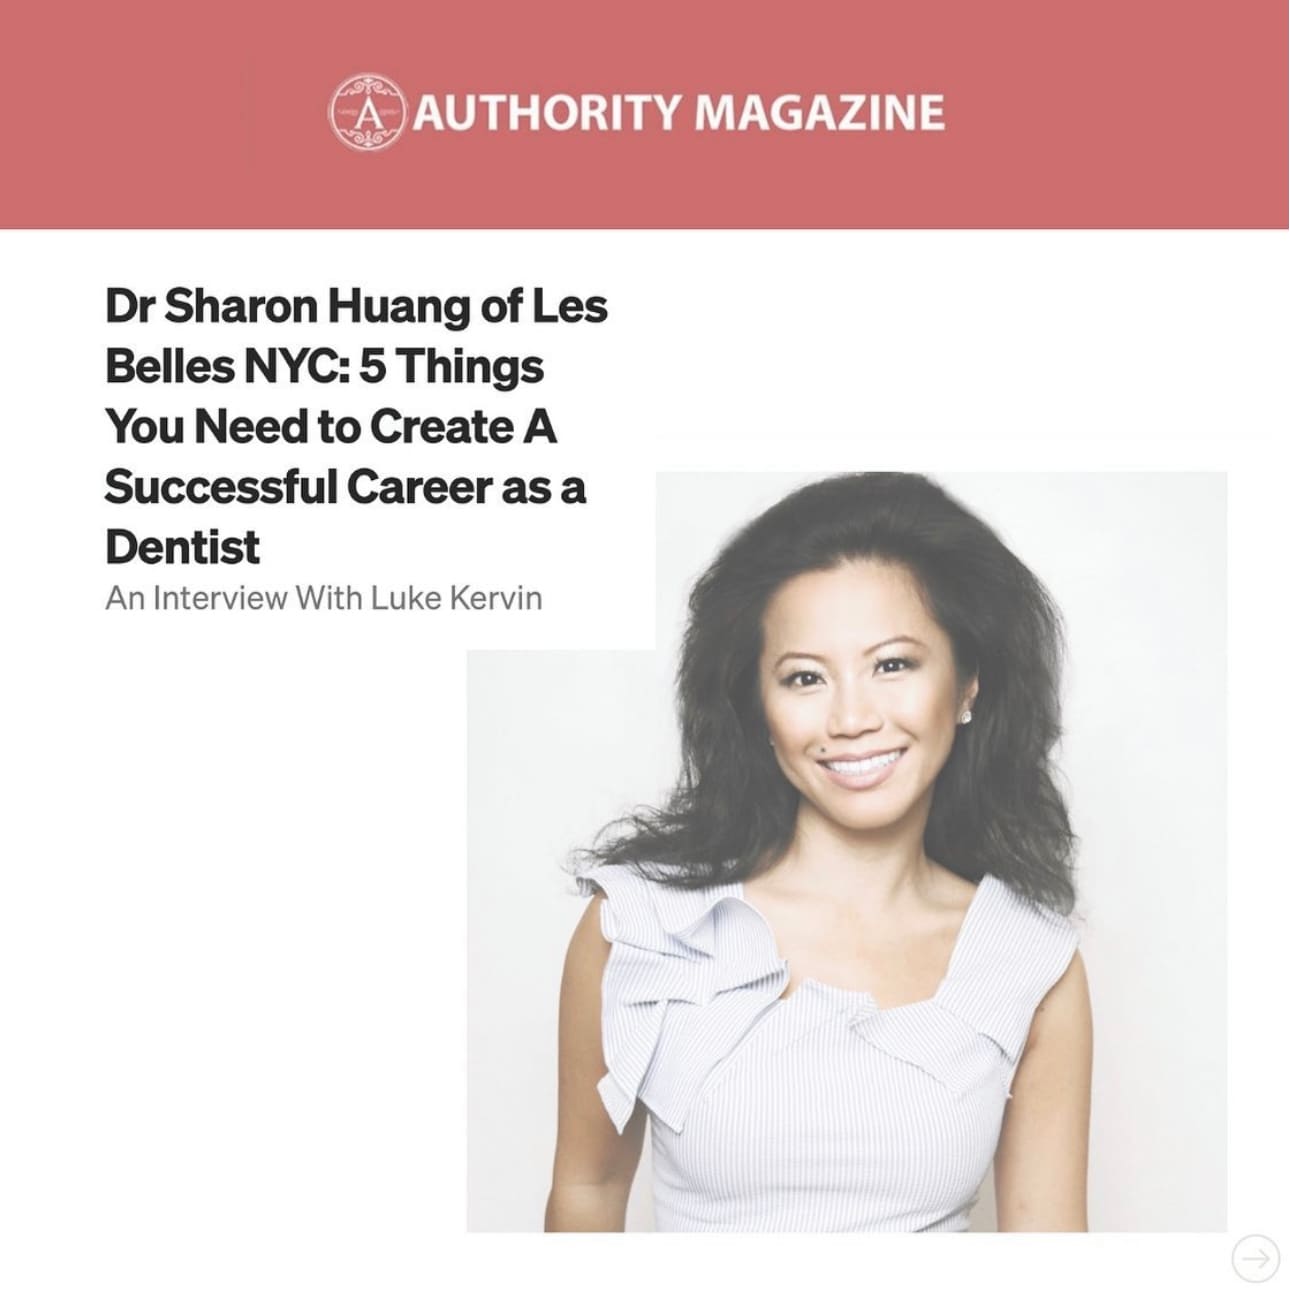 Dr Sharon Huang of Les Belles NYC: 5 Things You Need to Create A Successful Career as a Dentist